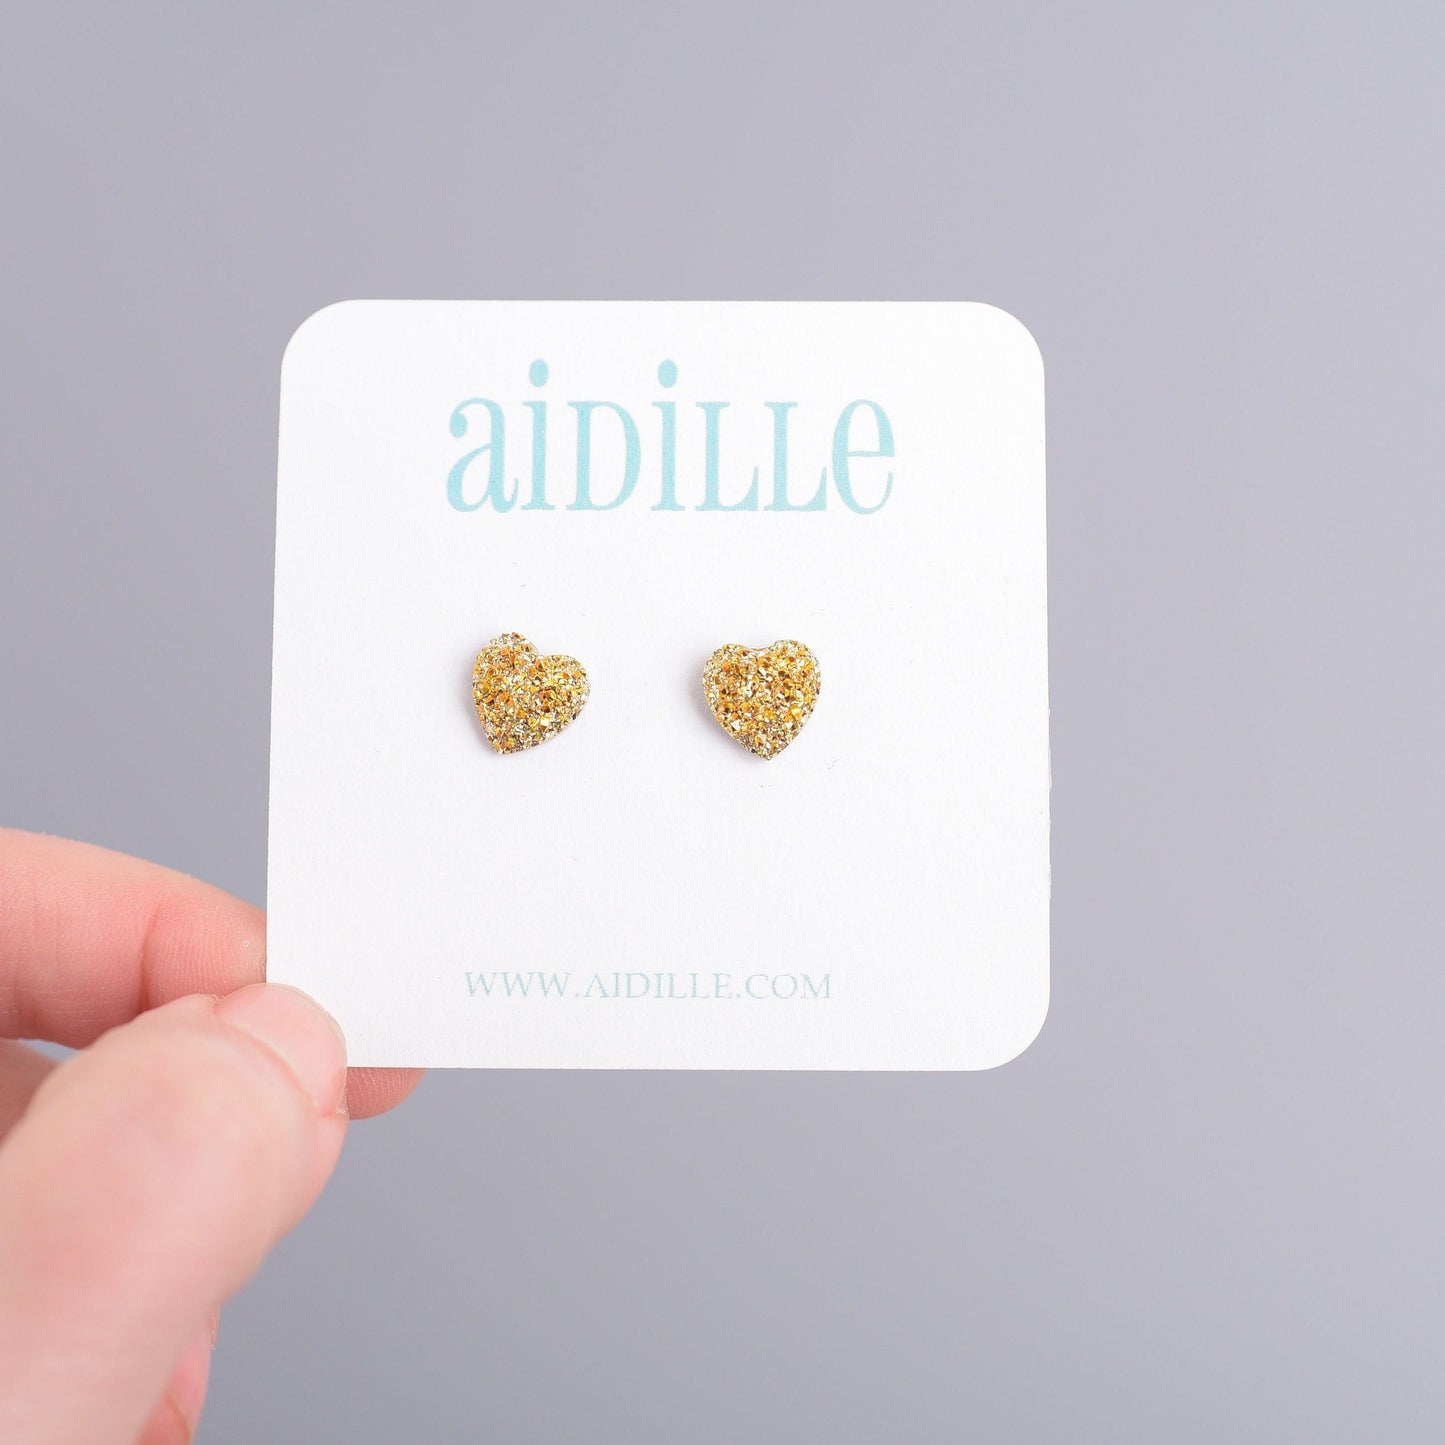 Little Gold Glitter Earrings with Titanium Posts